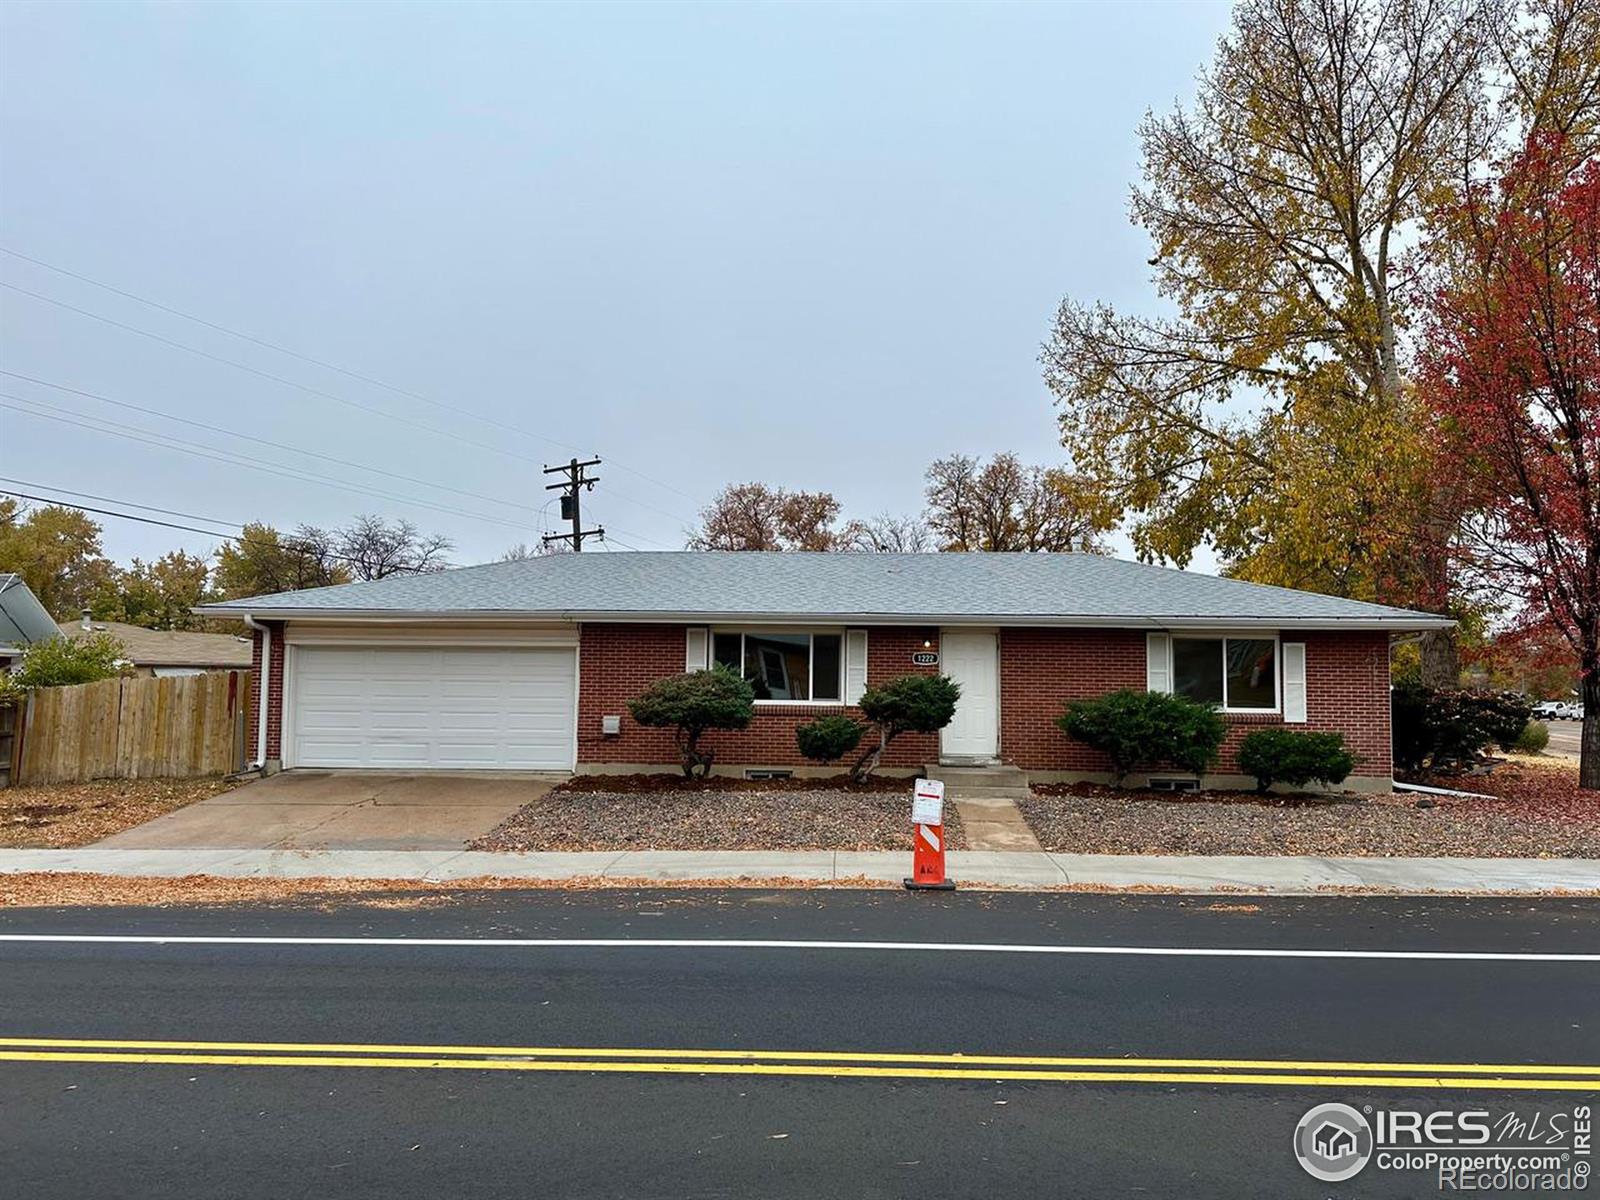 Report Image for 1222  26th Street,Greeley, Colorado